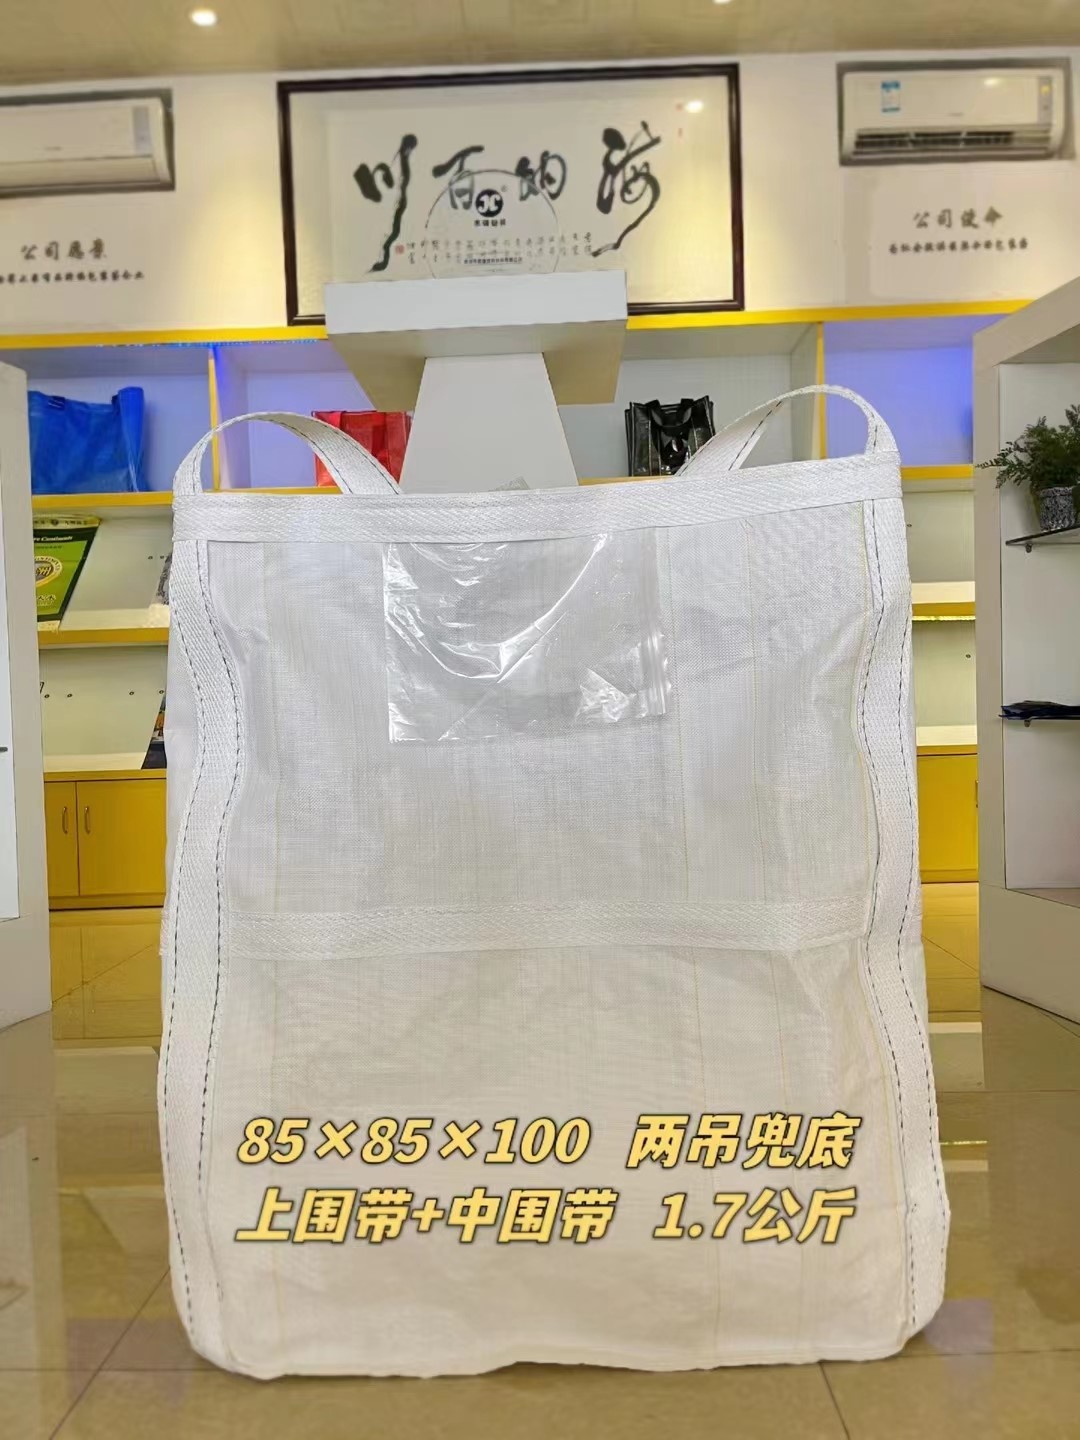 How to find suitable for matching their own container bags?